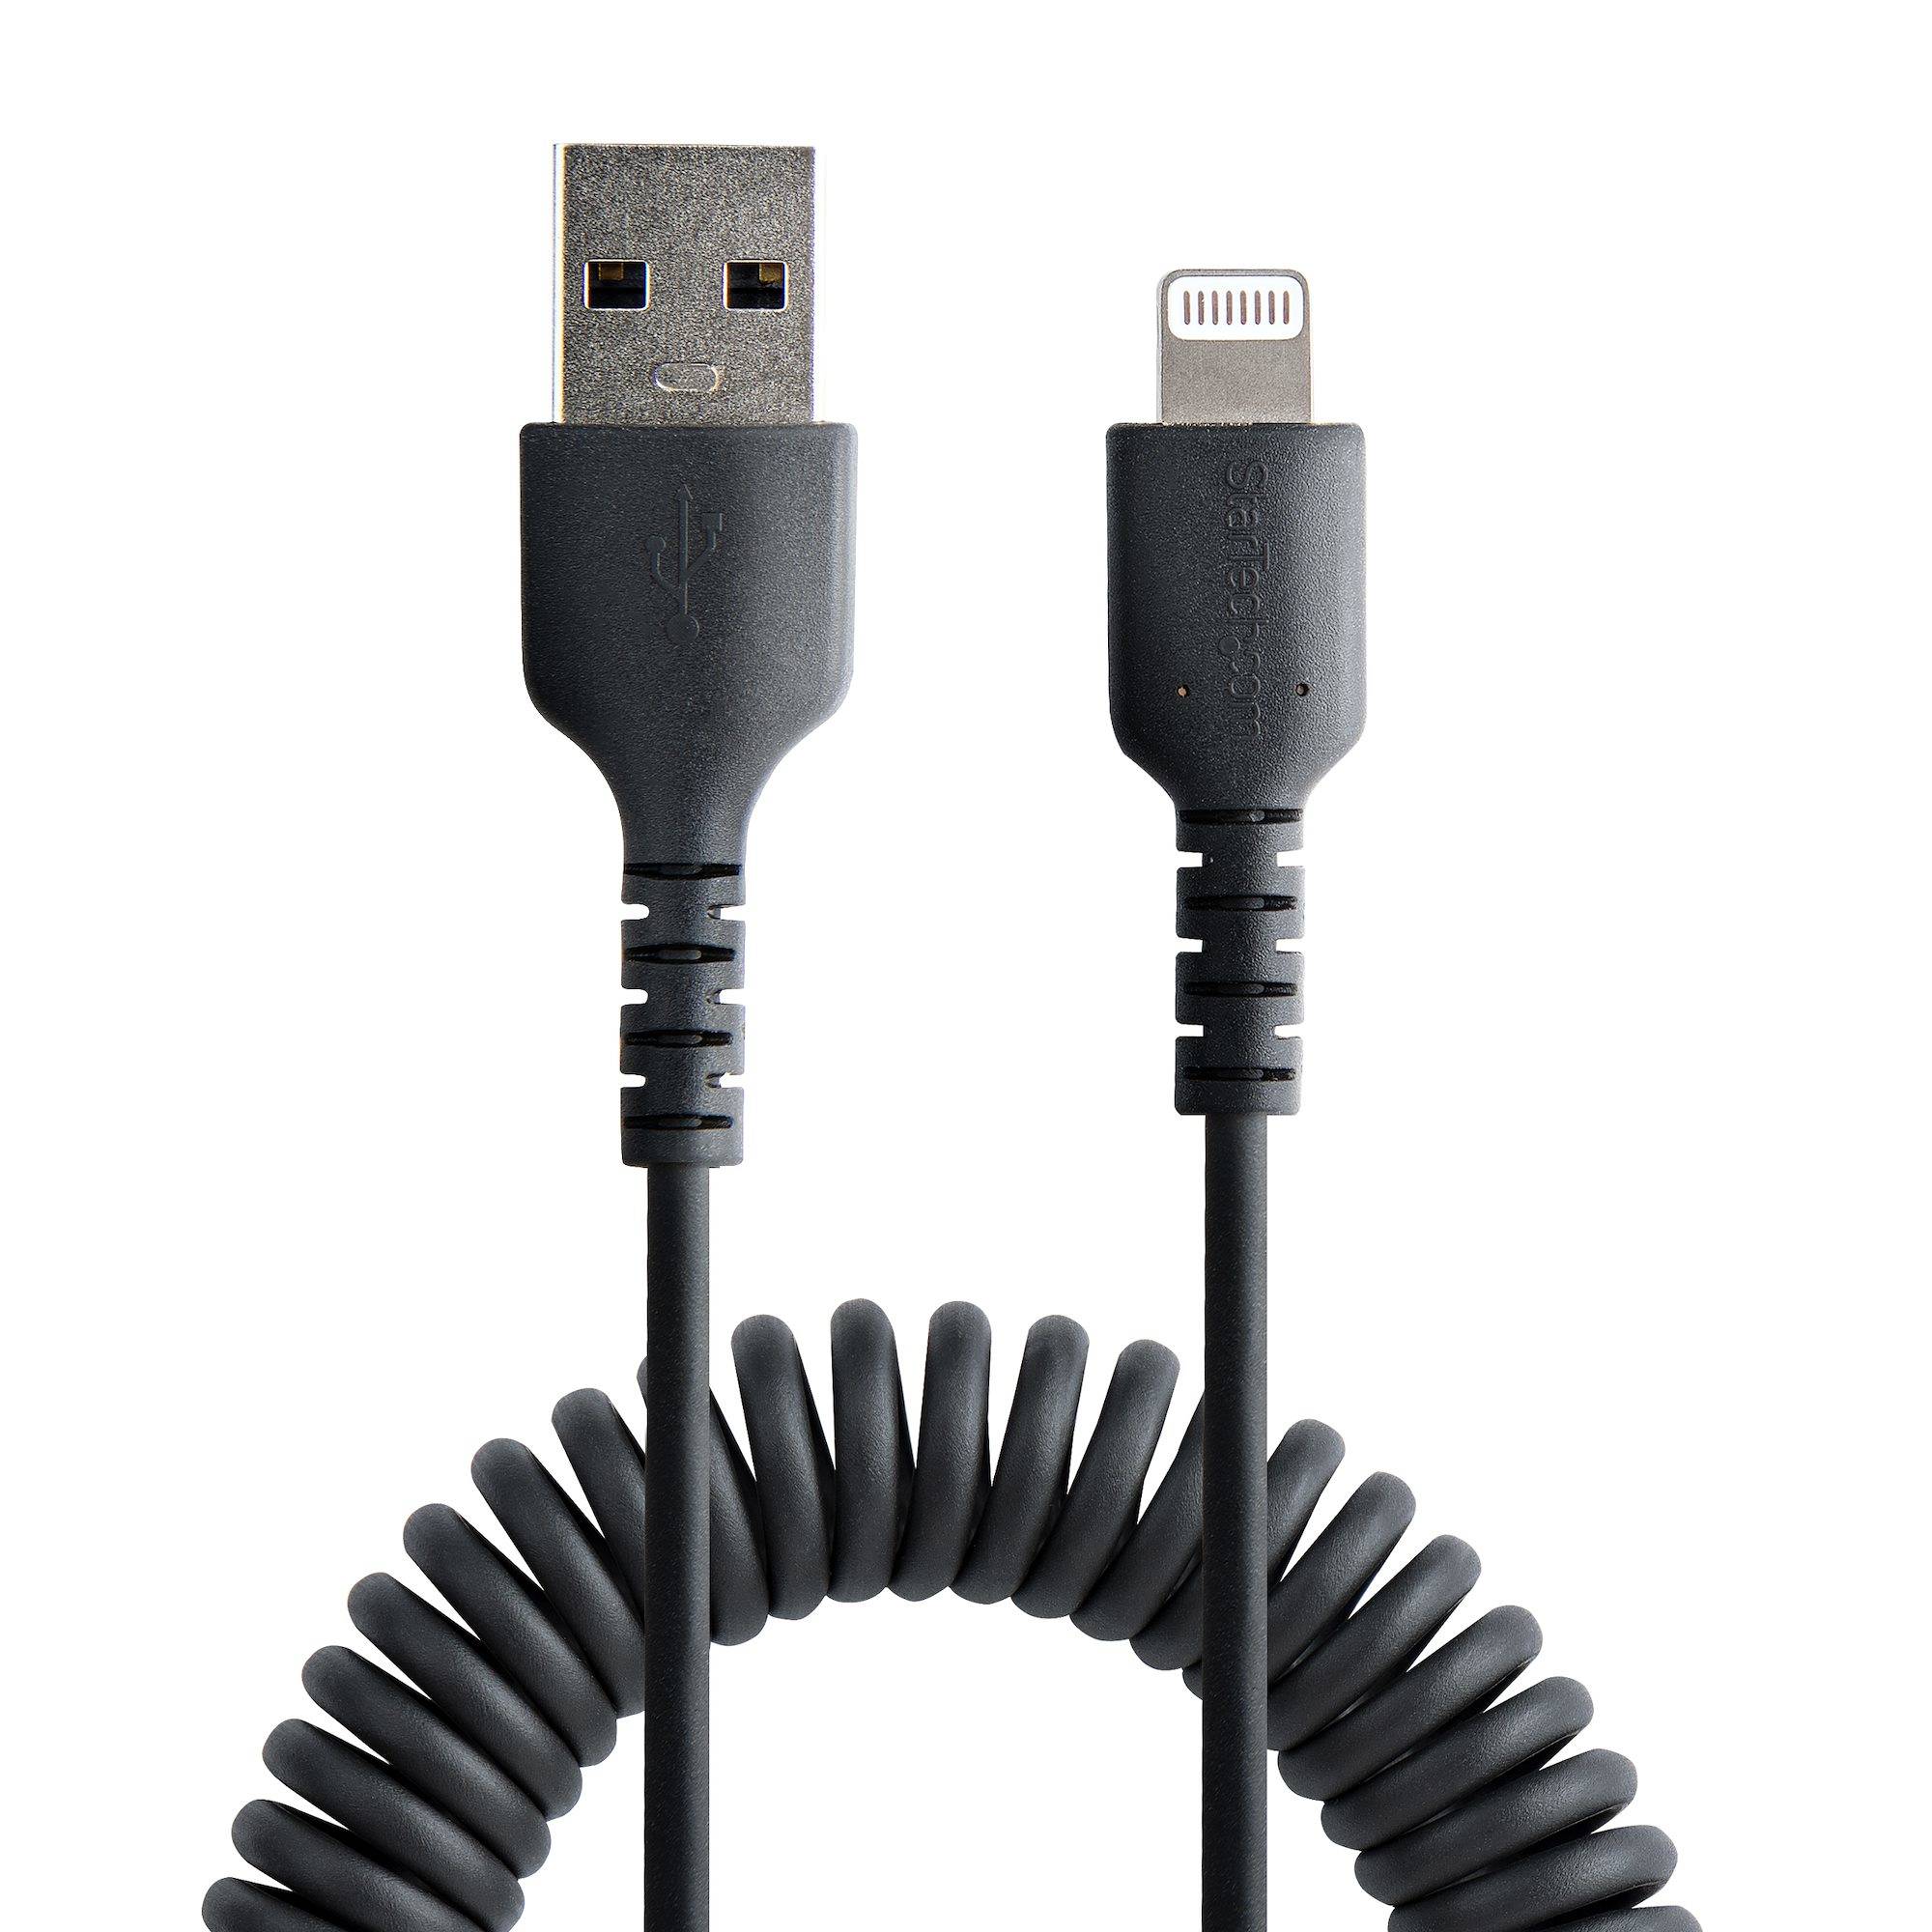 Rca Informatique - image du produit : USB TO LIGHTNING CABLE - 50CM (20IN) COILED CABLE BLACK